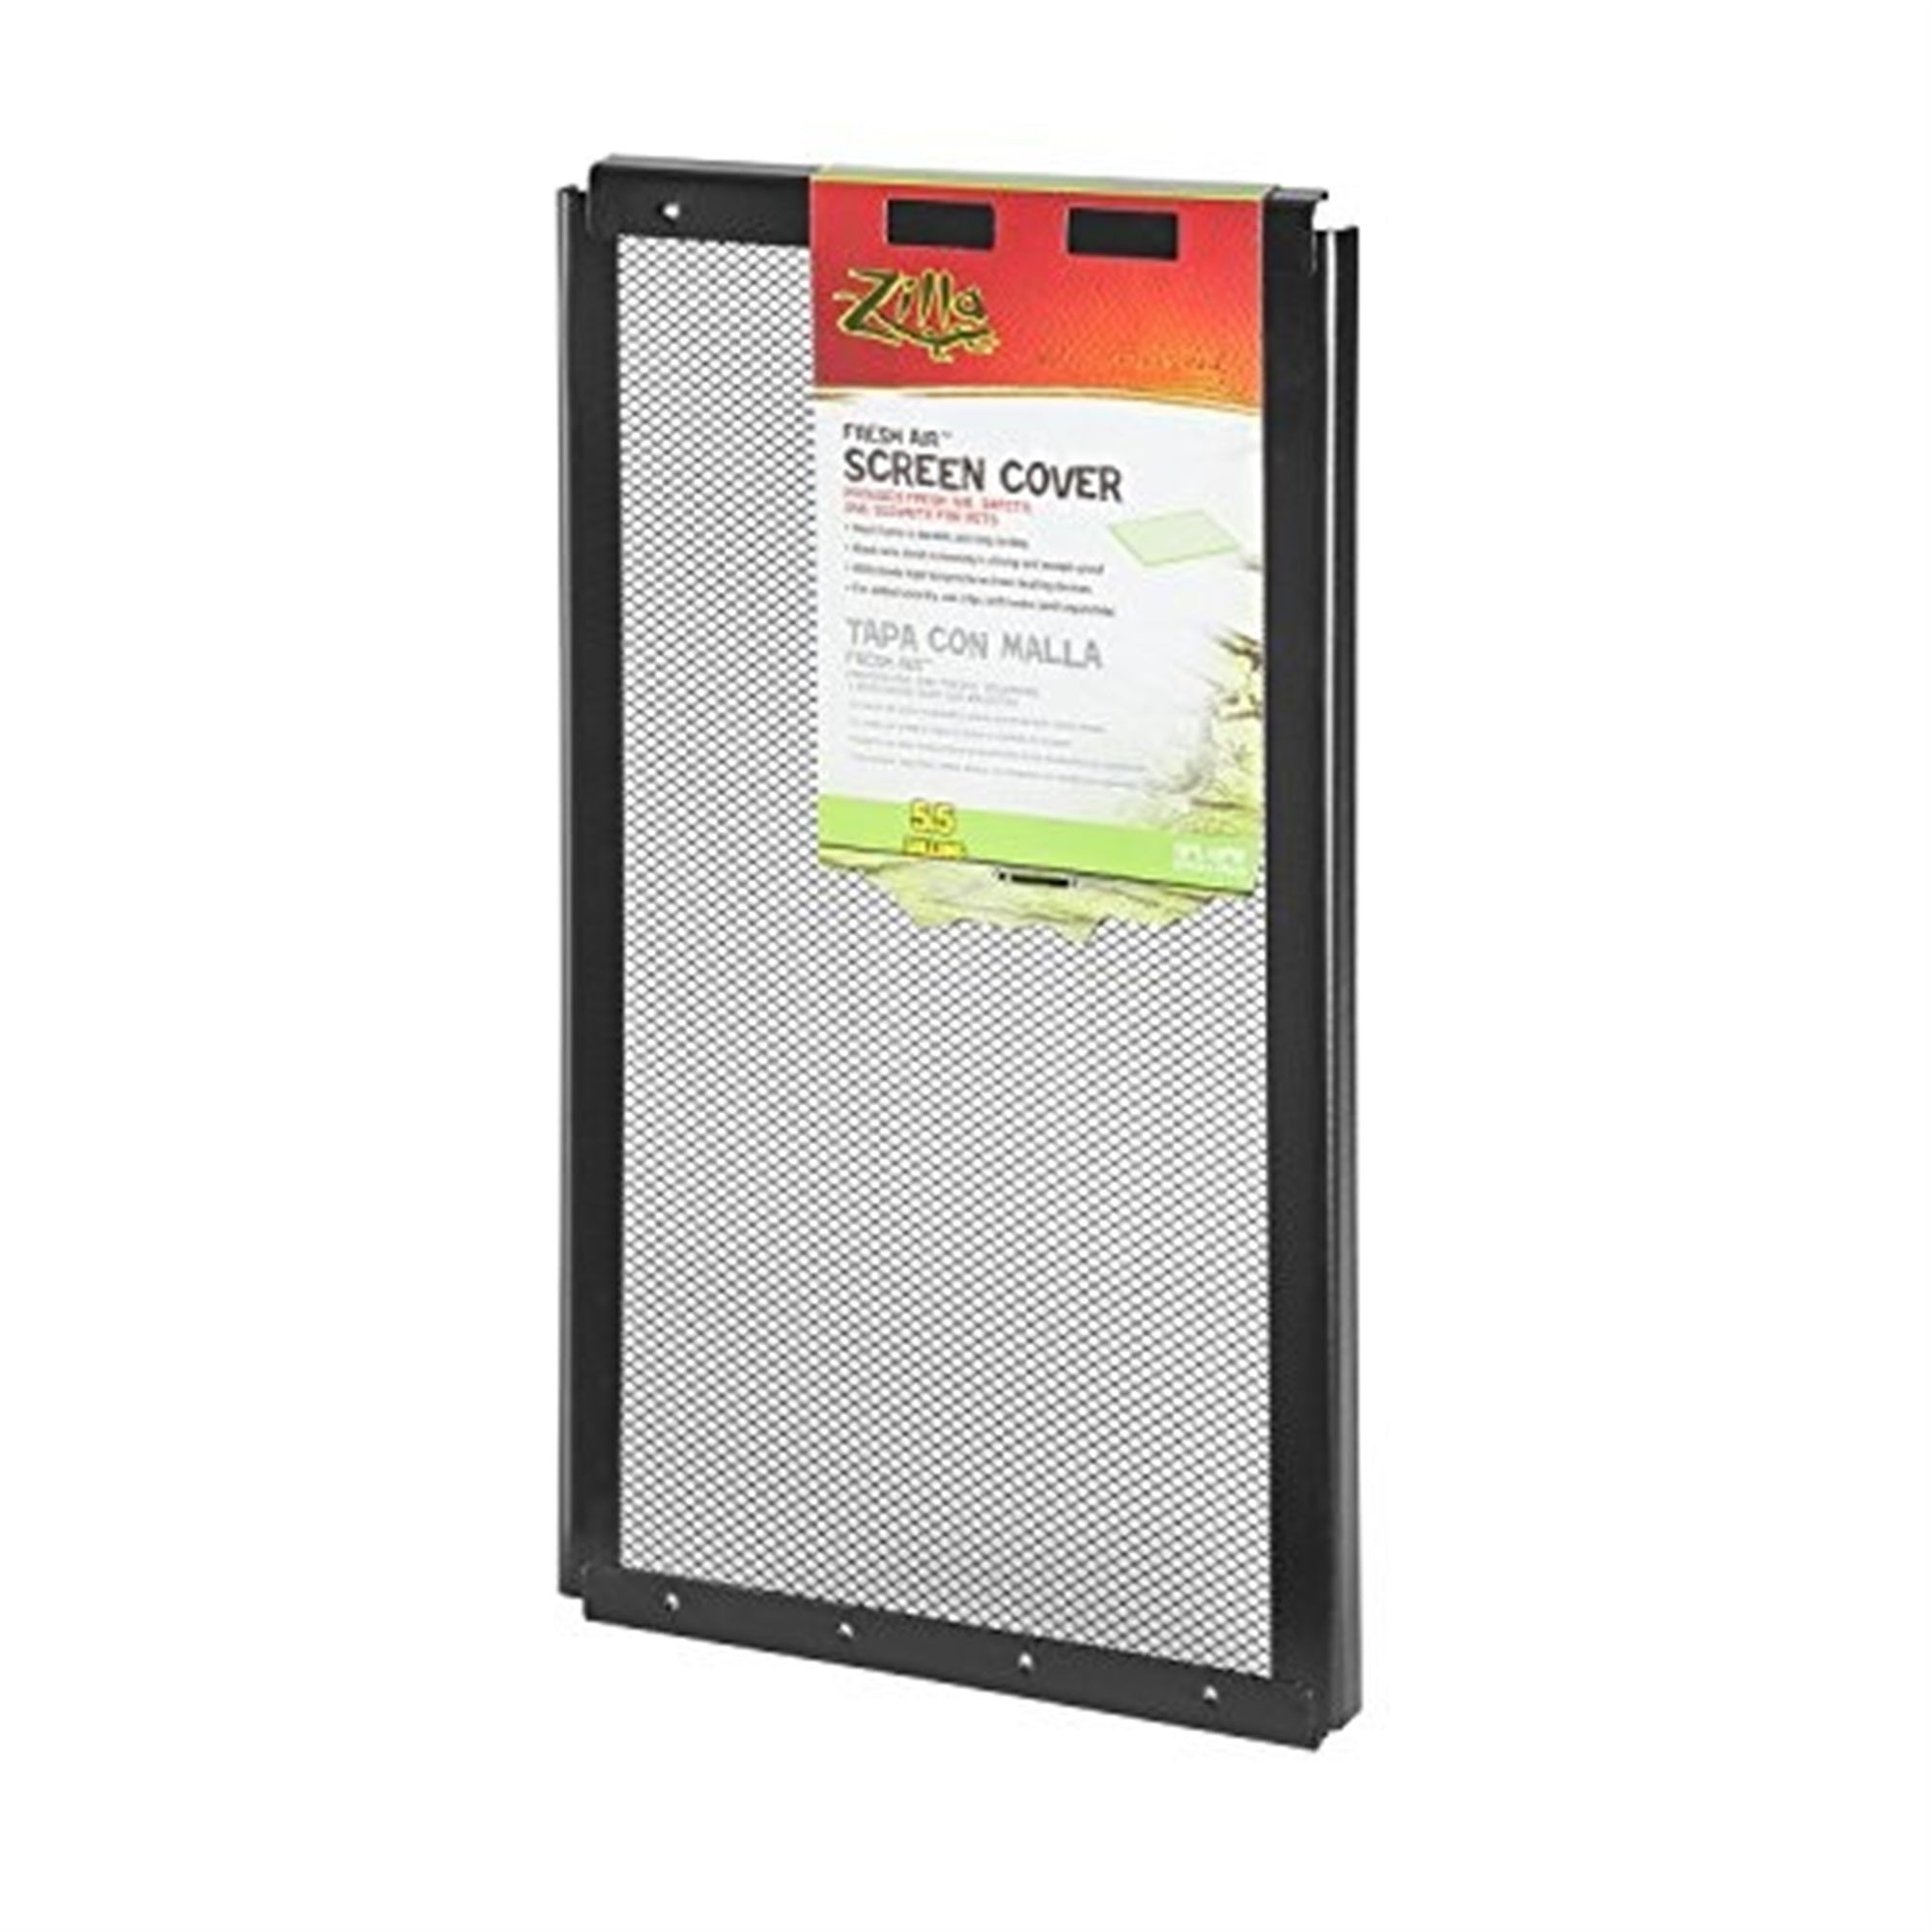 Zilla Fresh Air Solid Screen Cover for 5.5 Tank Terrariums, 16 x 8 inches